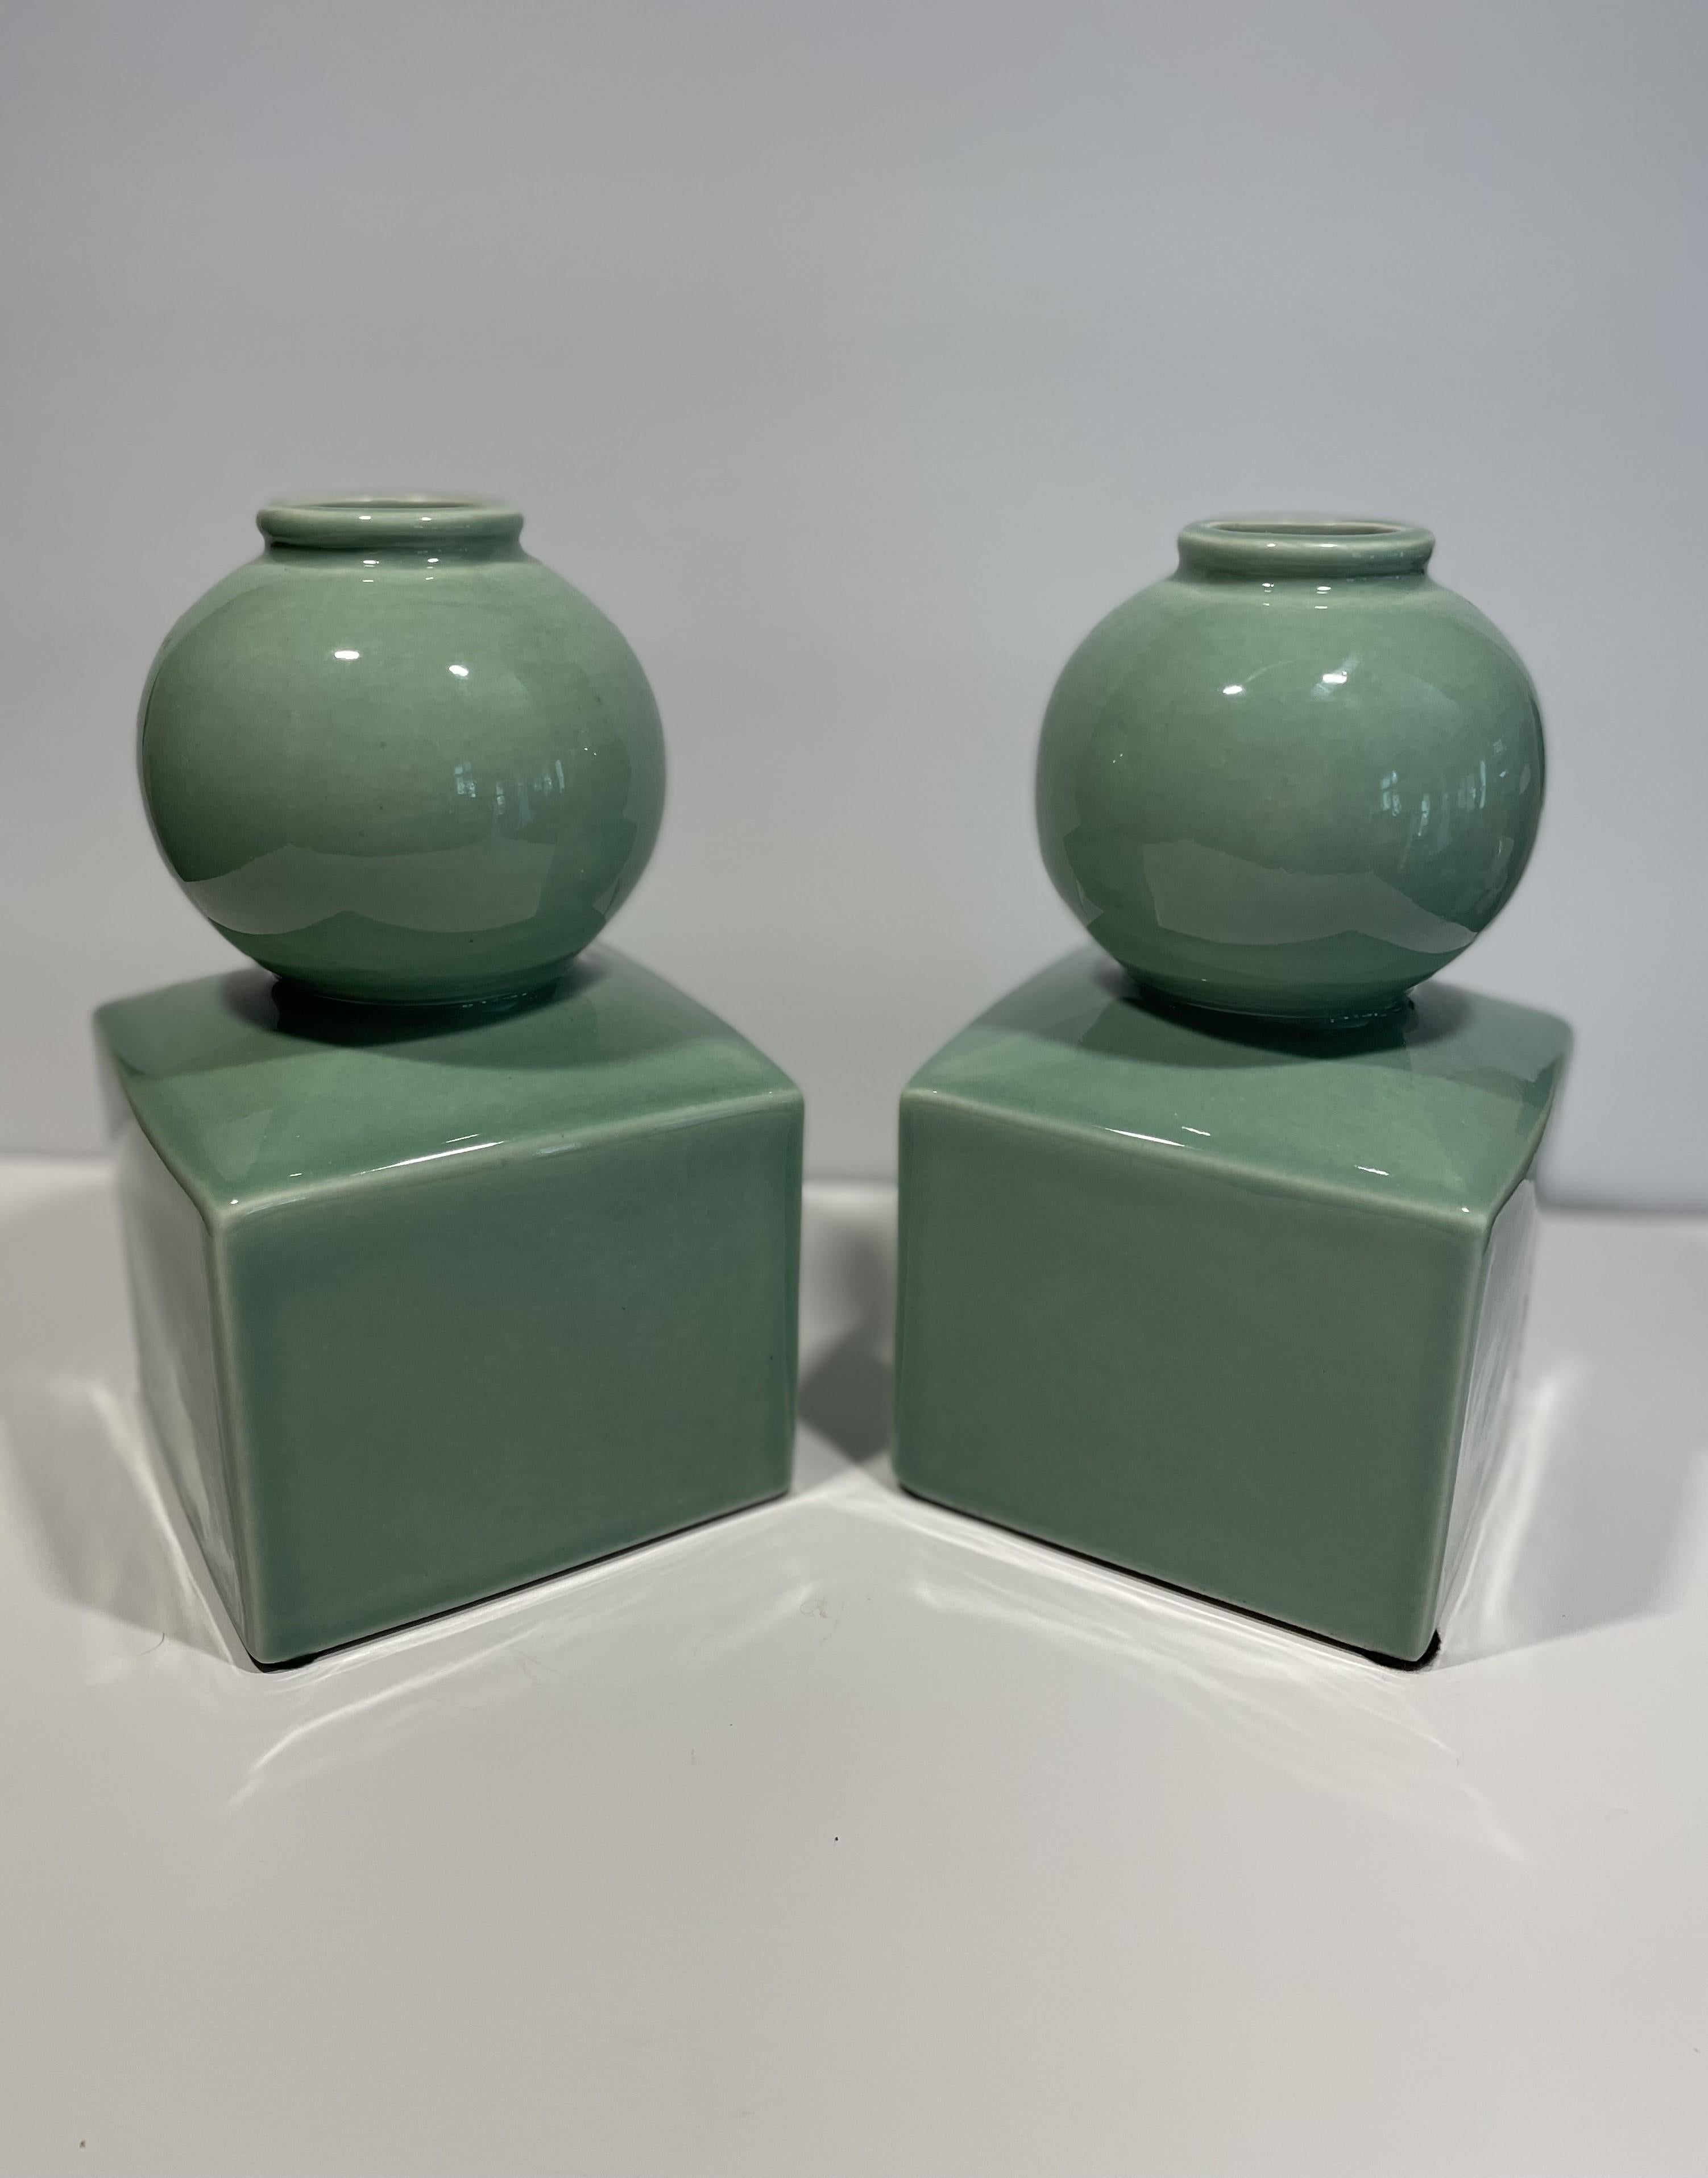 Celadon Ceramic Vases or Bookends Attributed to Serena & Lily -- A Pair For Sale 1